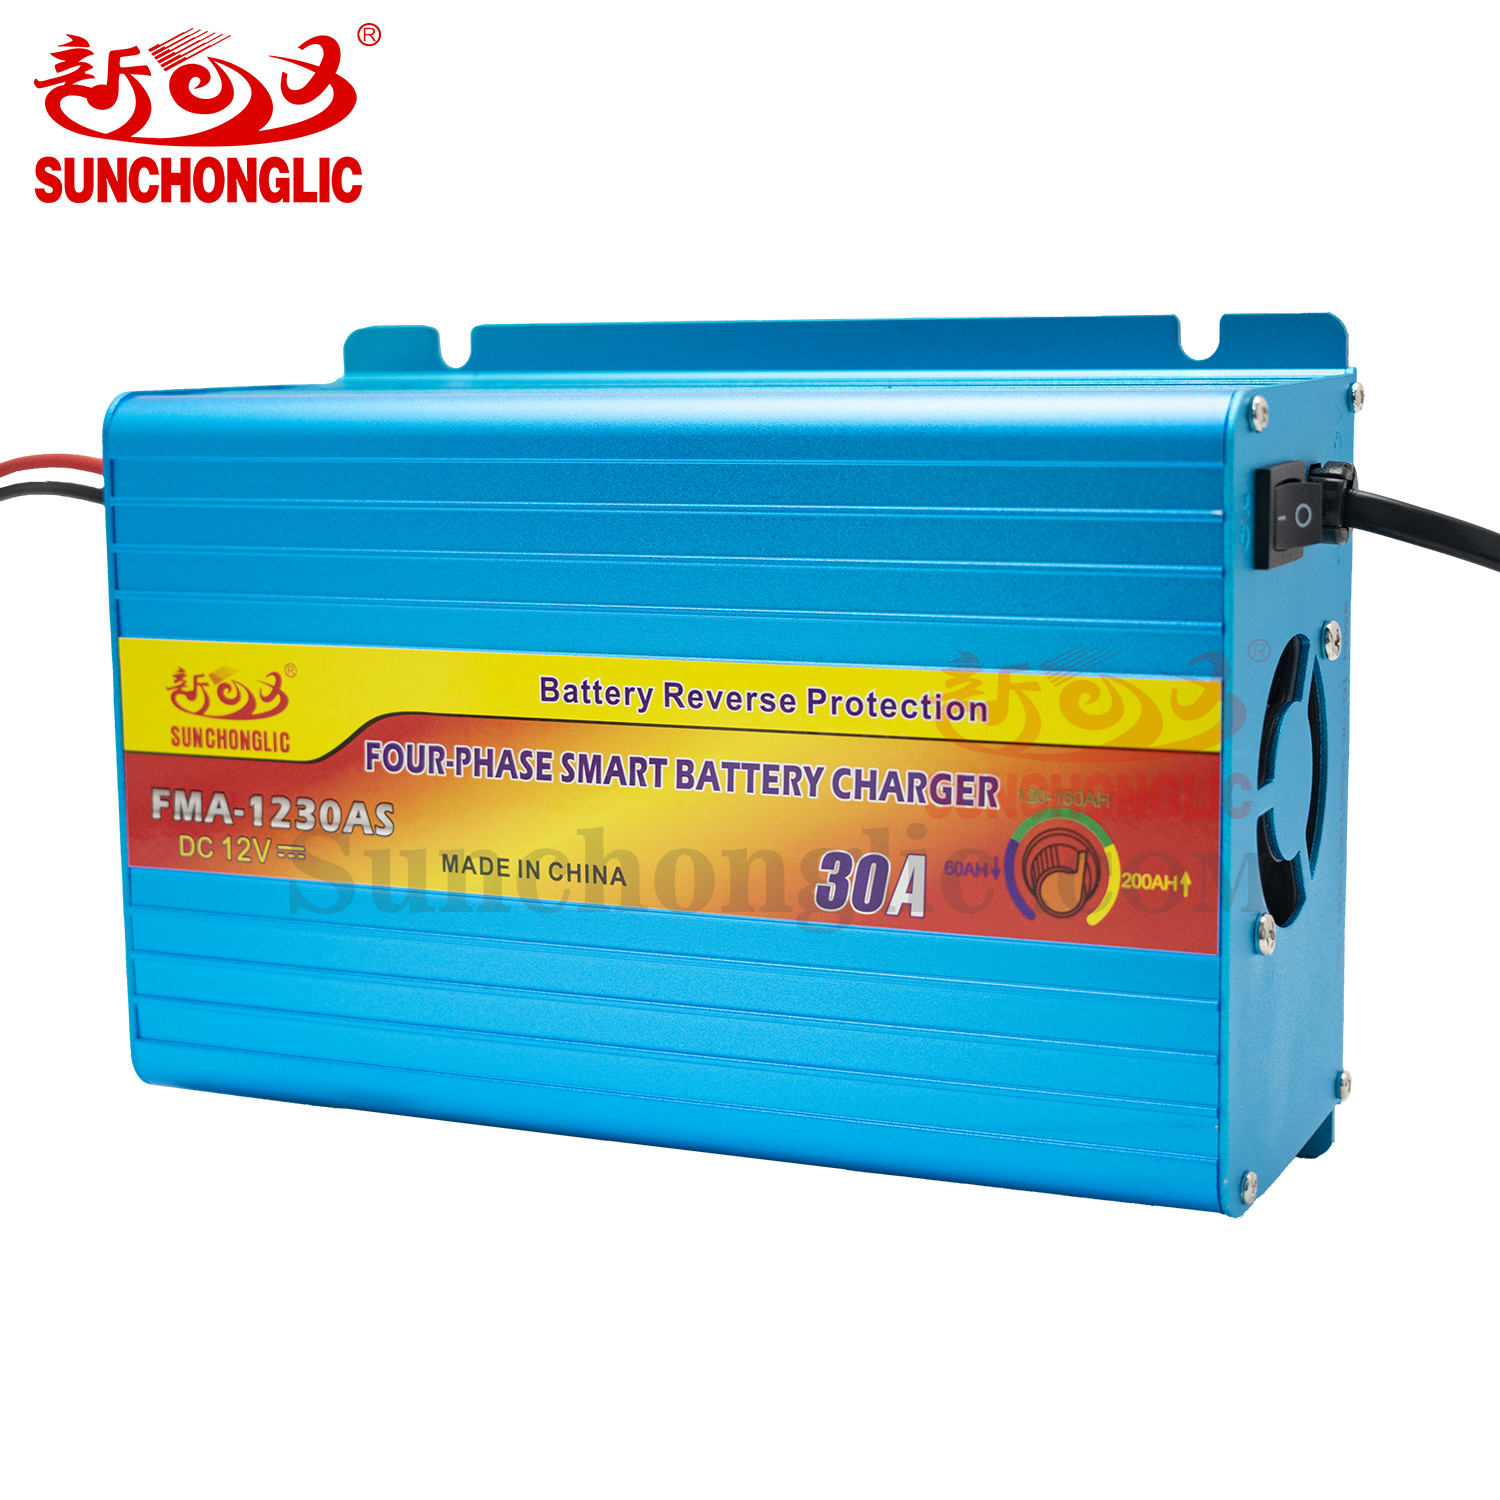 AGM/GEL Battery Charger - FMA-1230AS